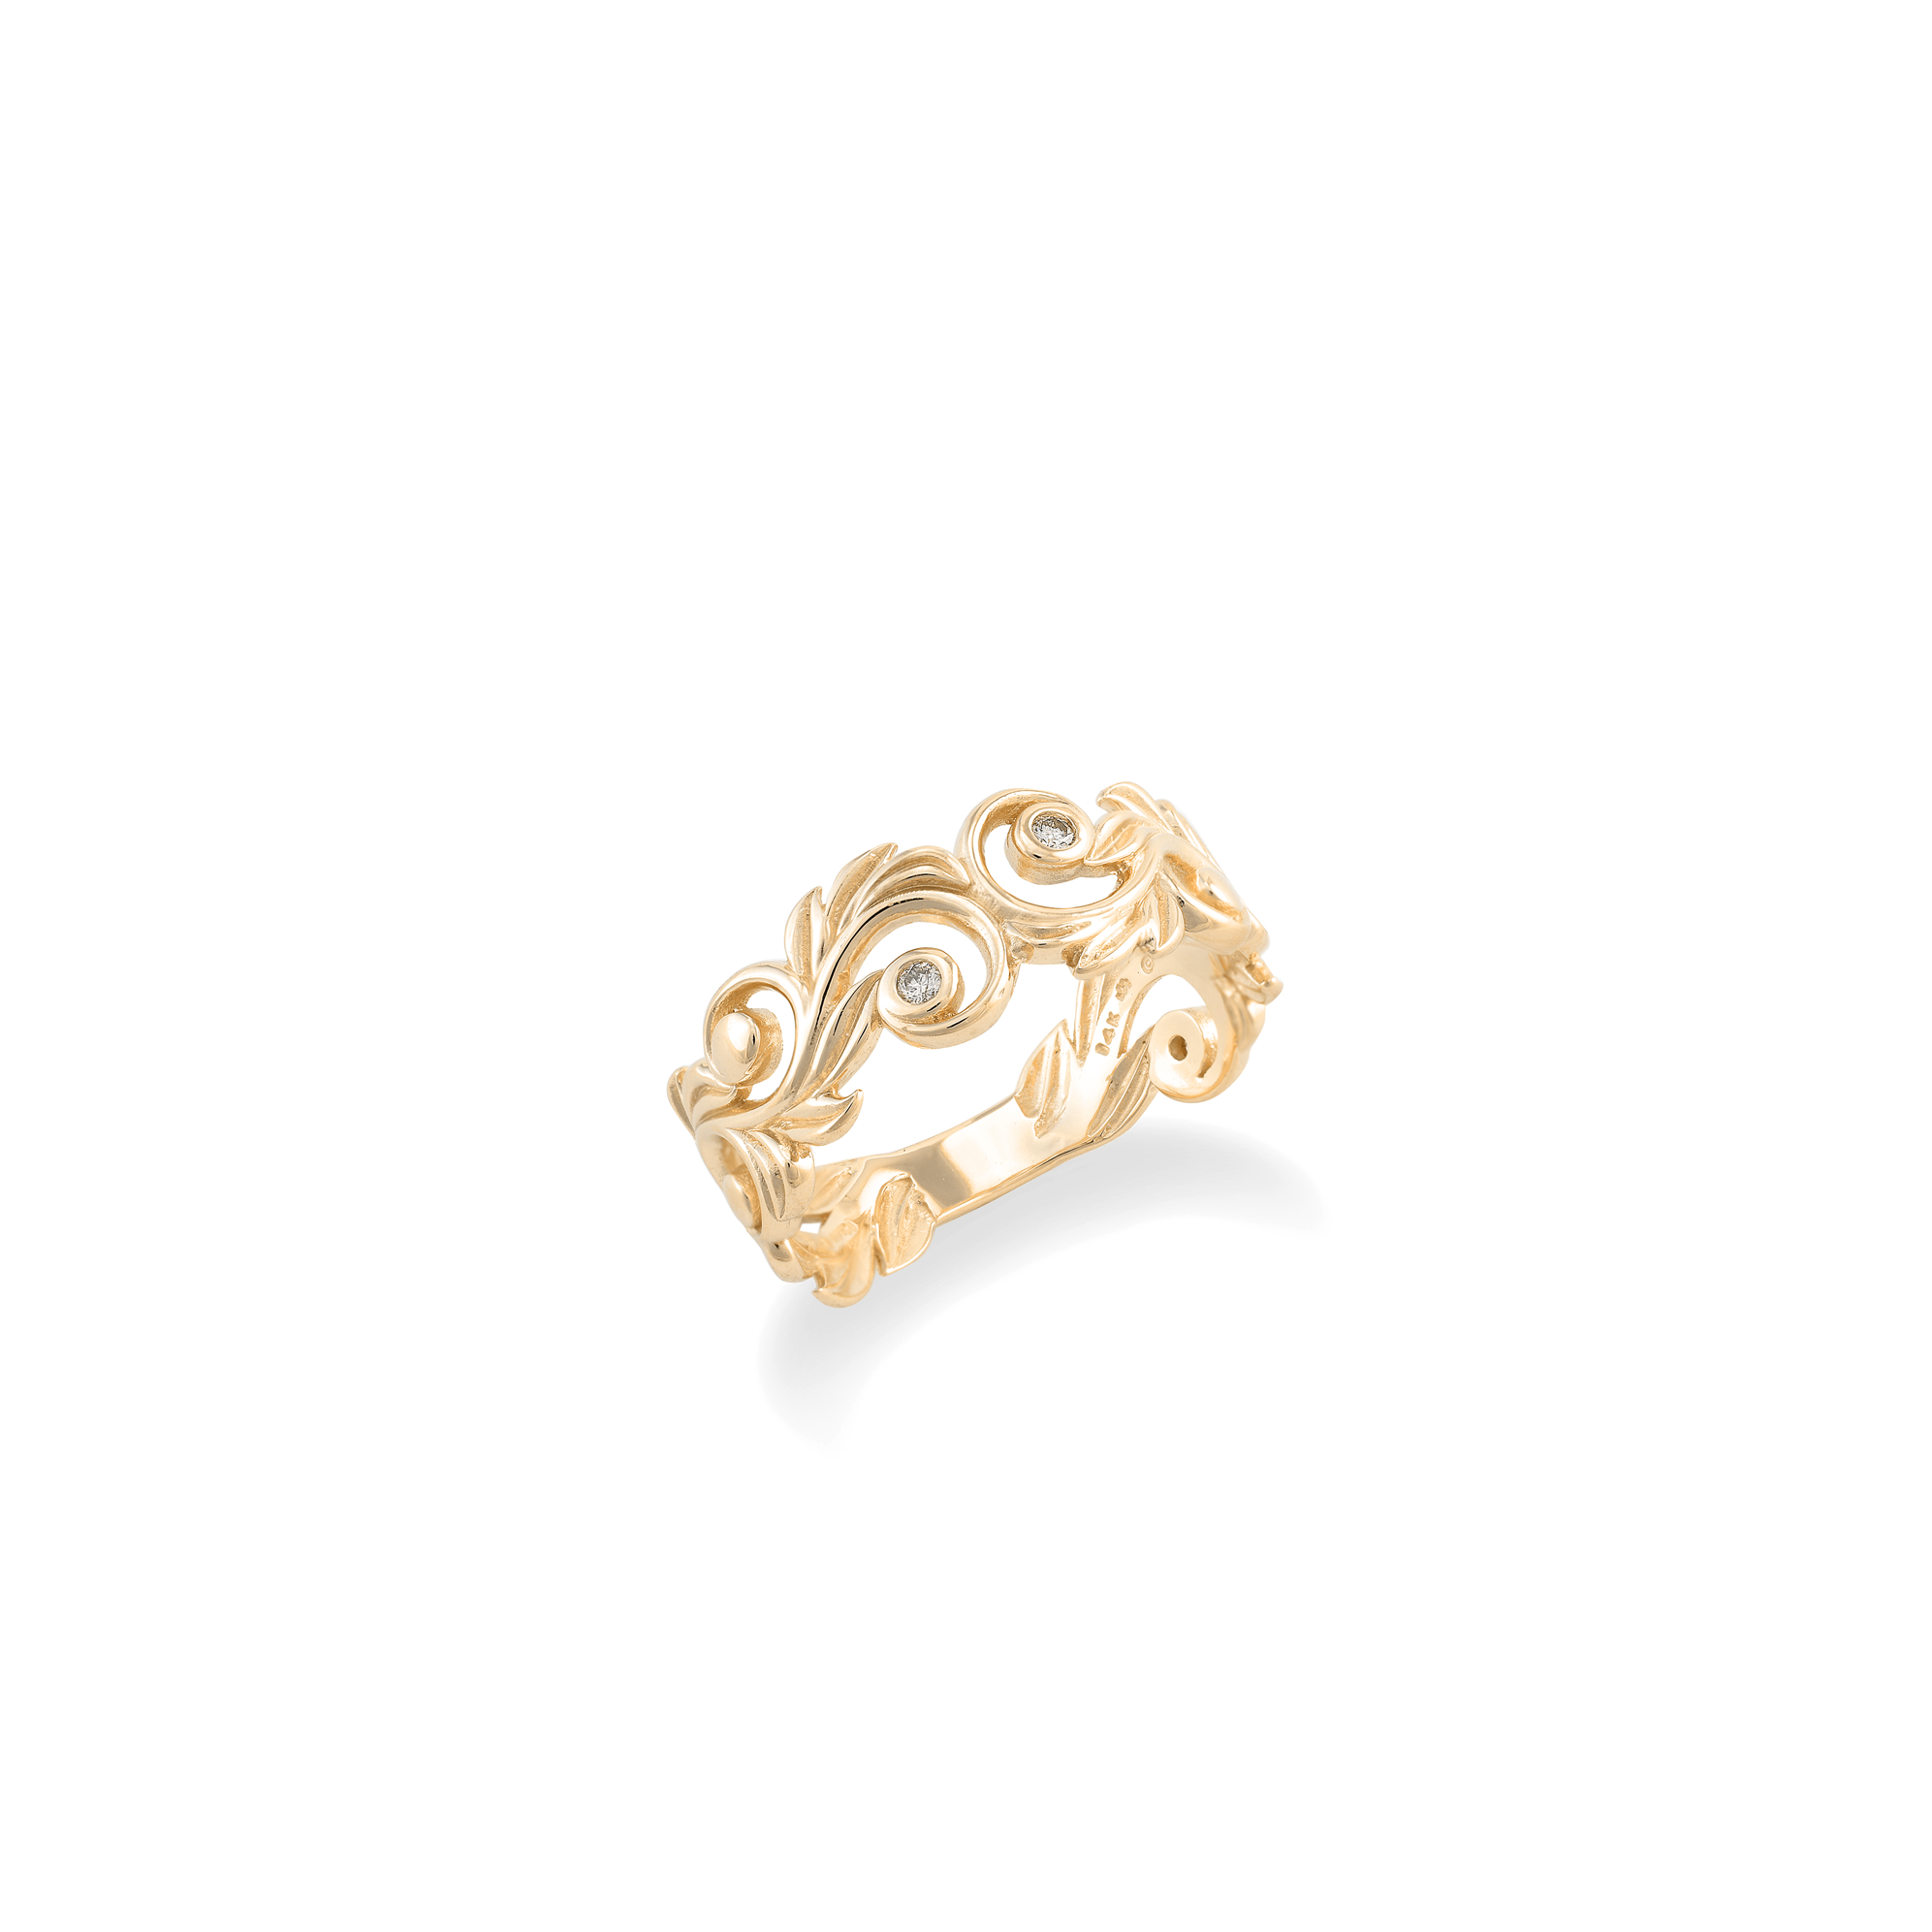 Living Heirloom Ring in Gold with Diamonds - 8mm